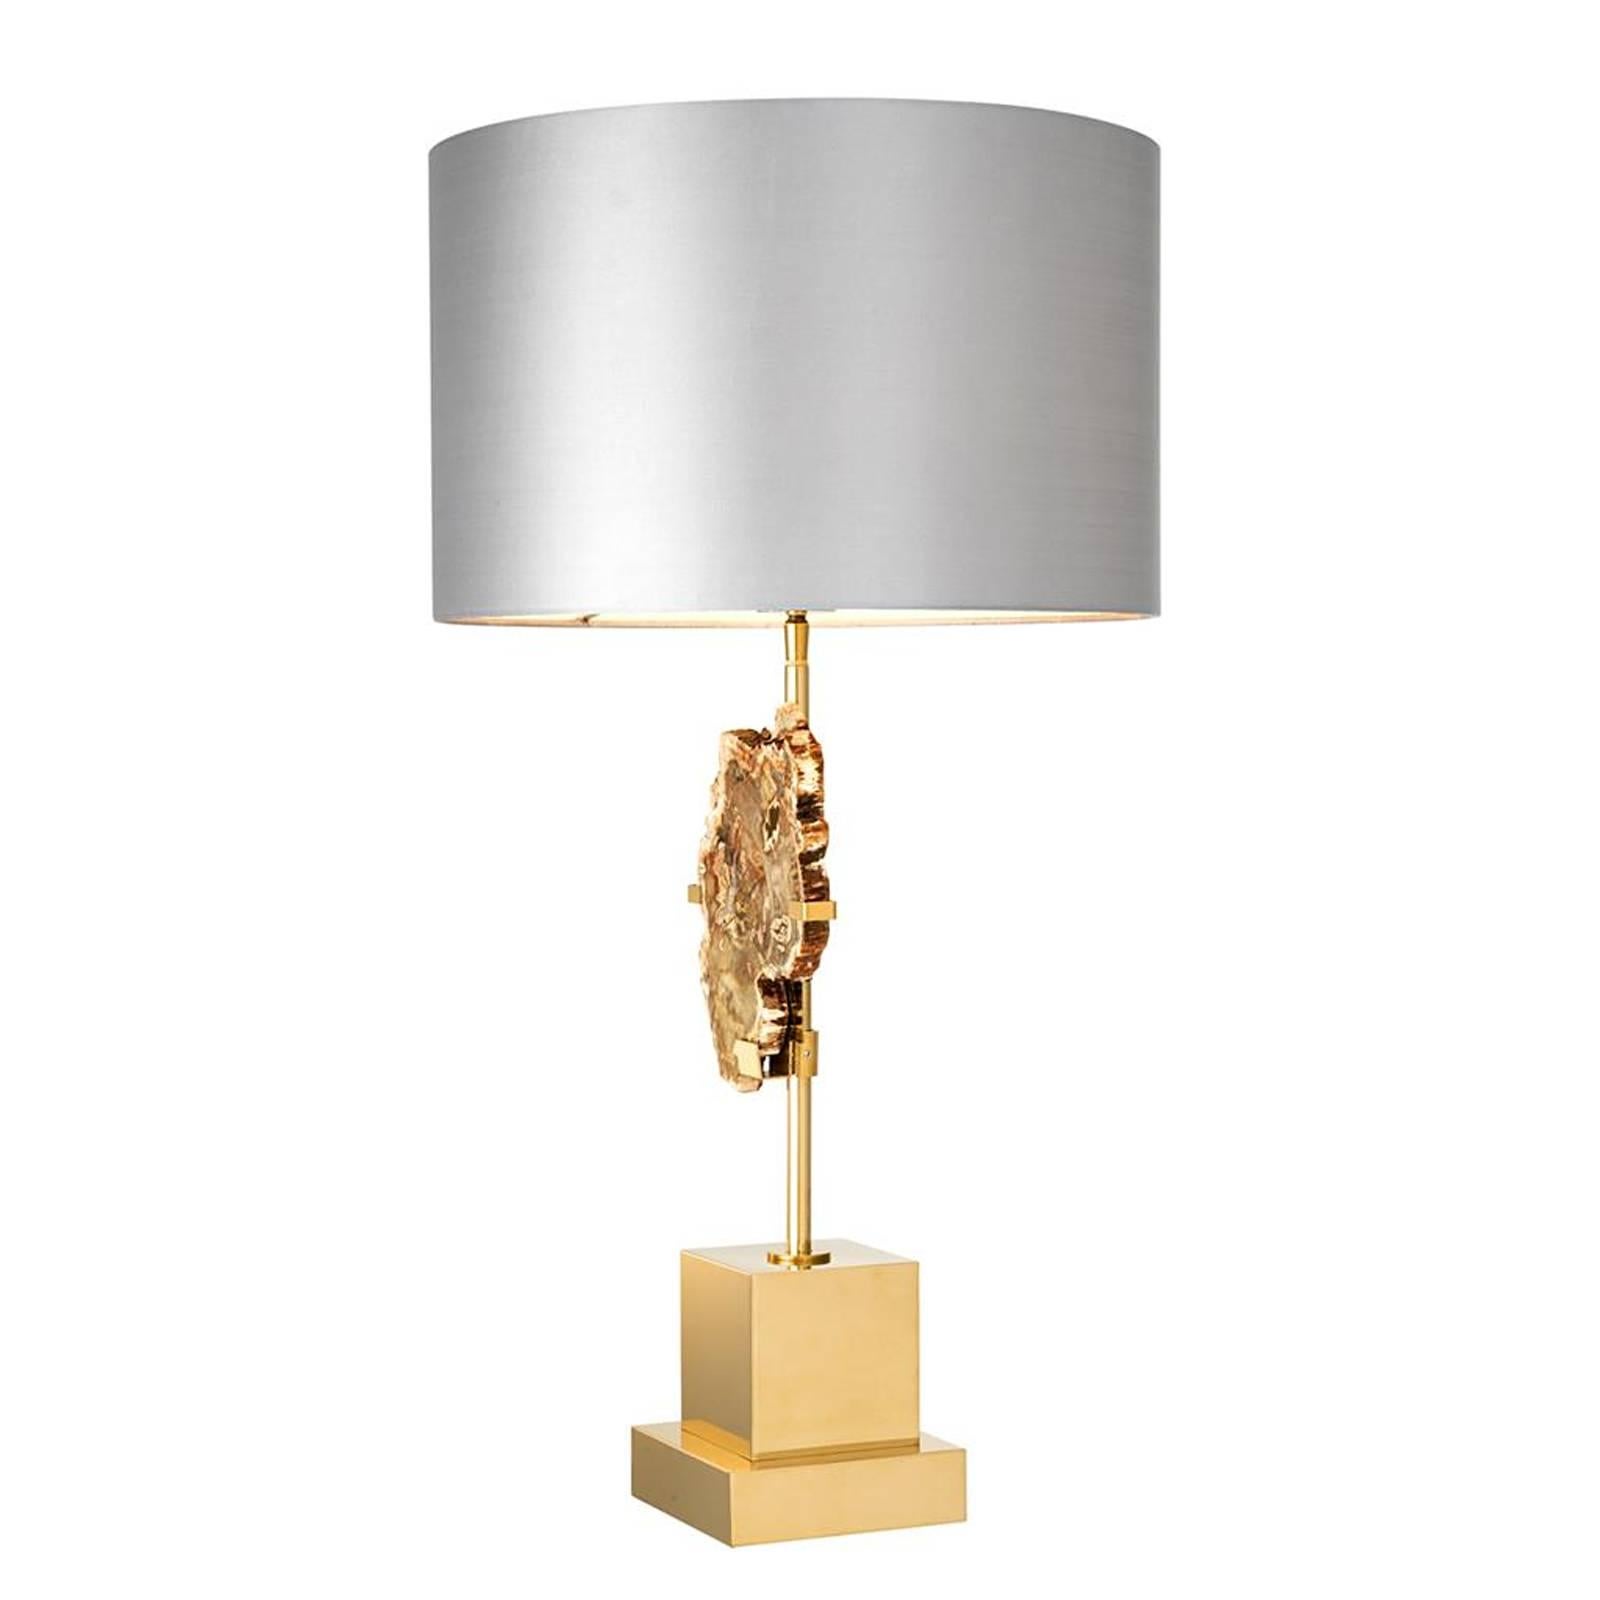 Chinese Dominus Table Lamp in Gold Finish with Petrified Wood